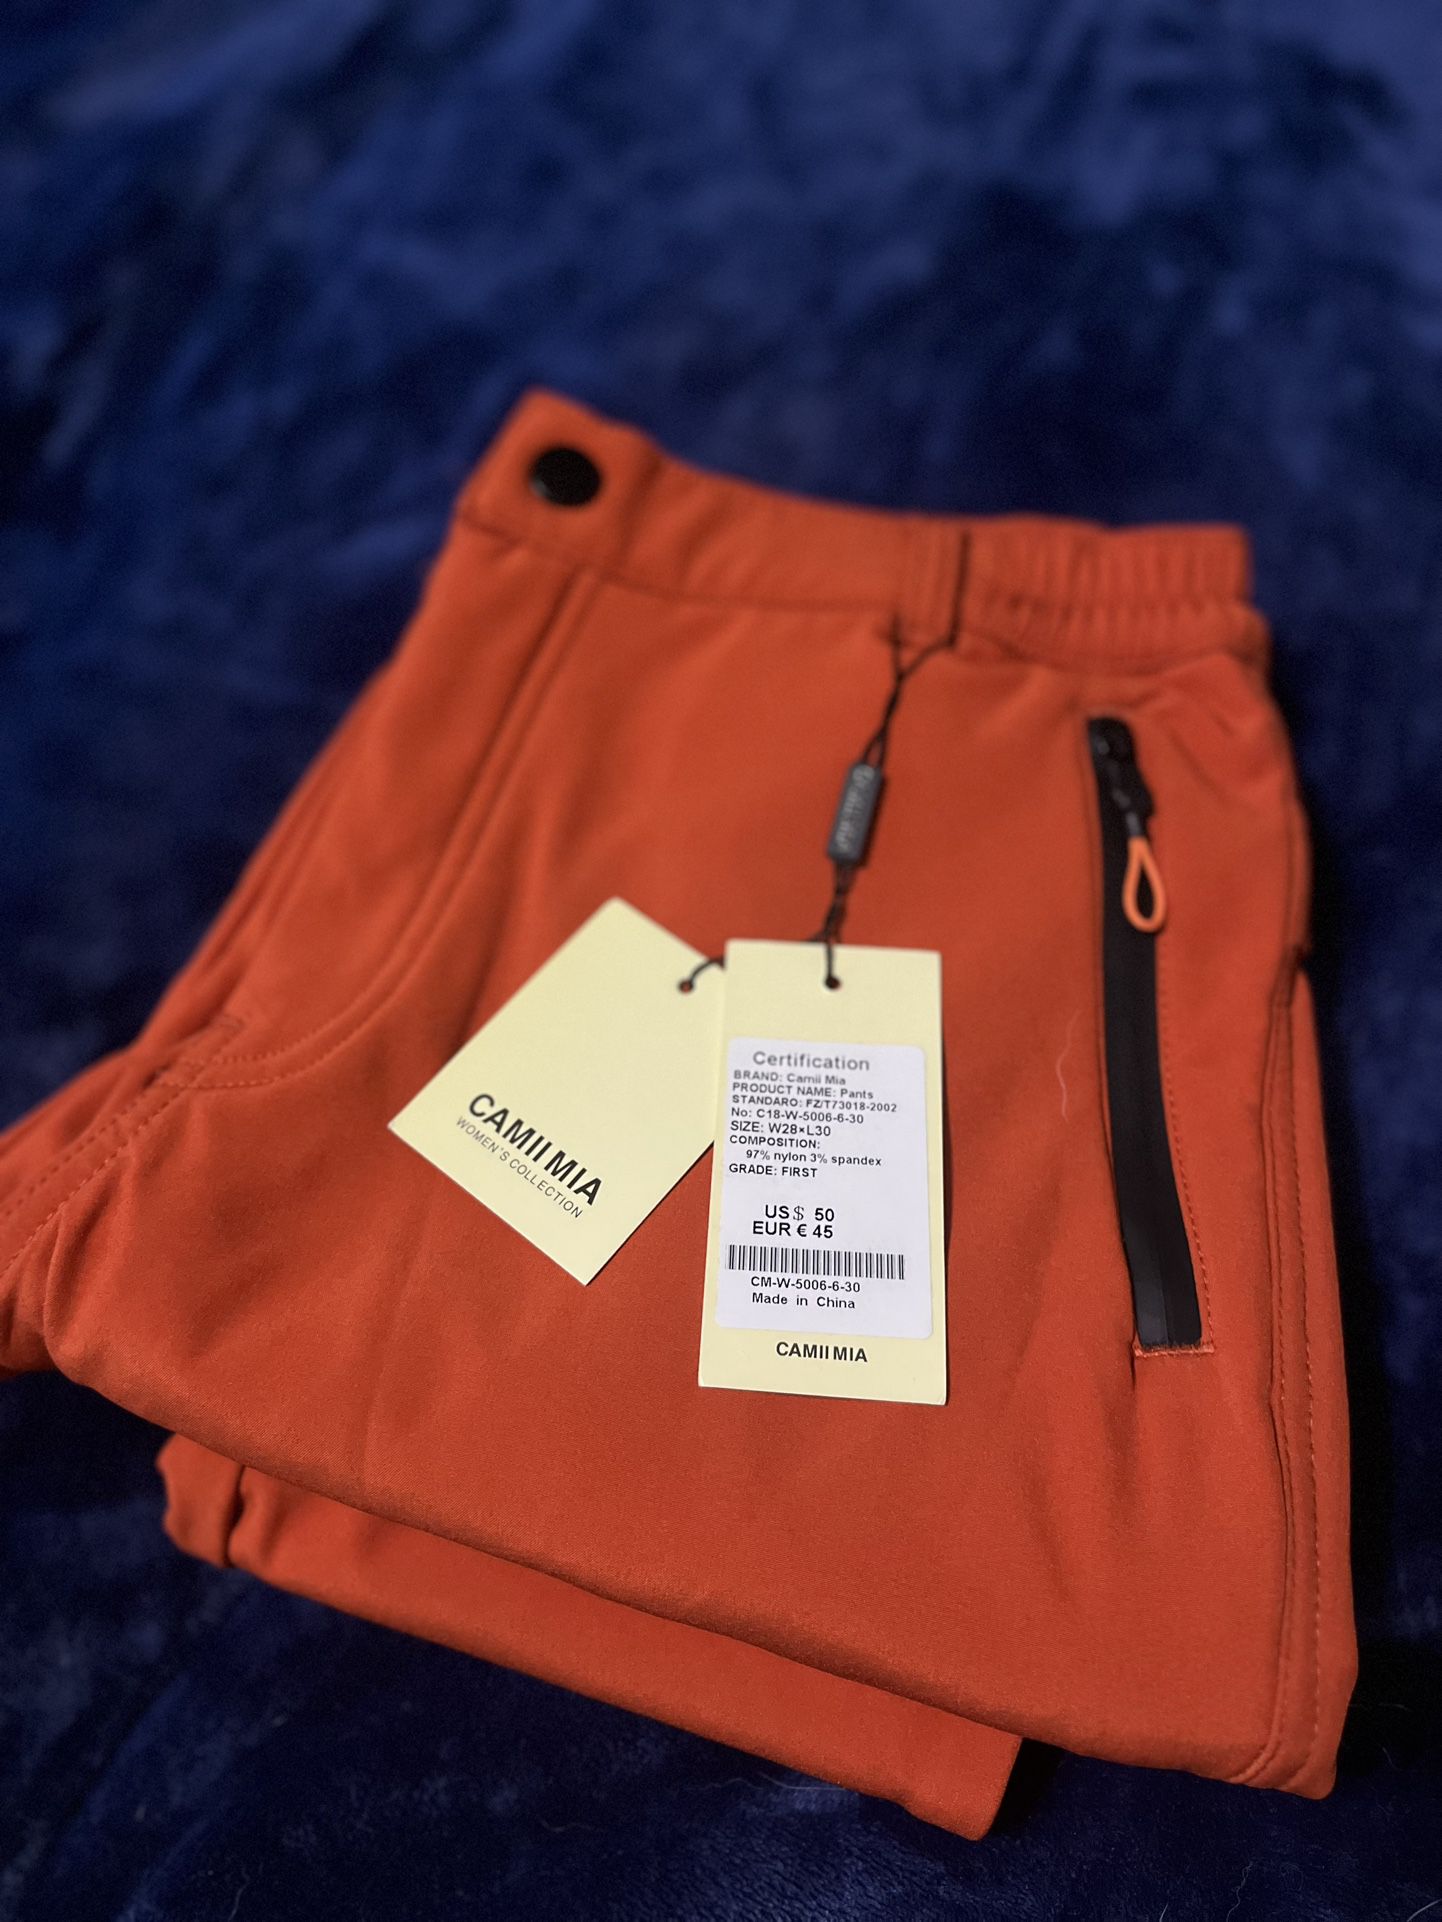 NWT - Size XS / S - Camii Mia Insulated Waterproof Pants for Sale